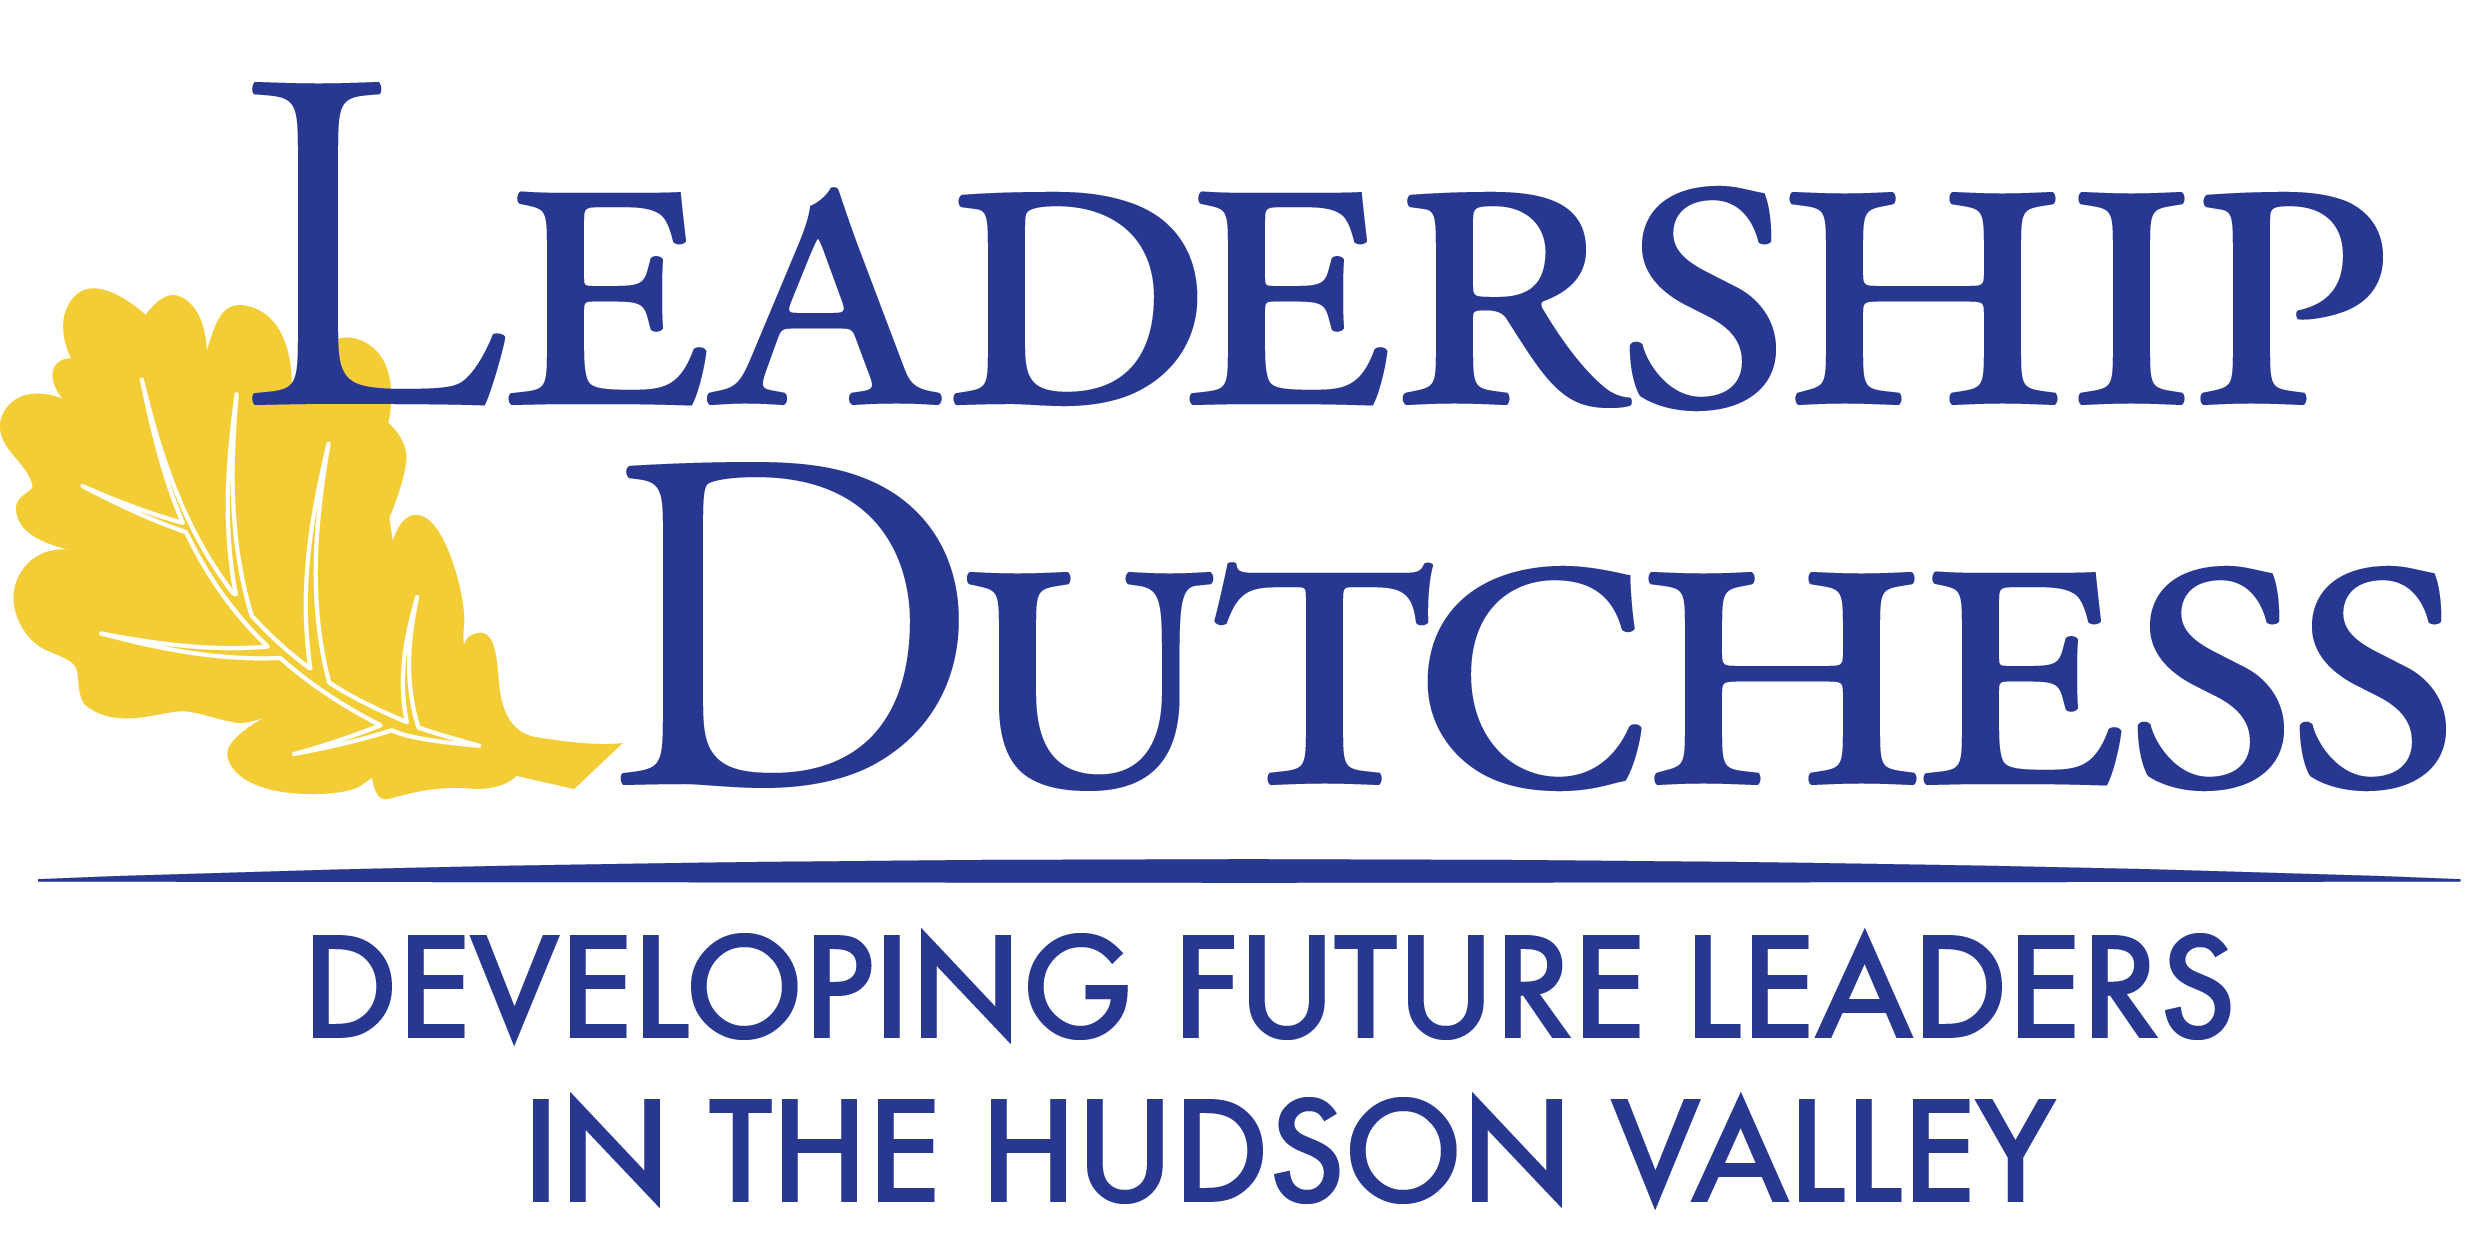 Image for Announcing the Leadership Dutchess Class of 2023